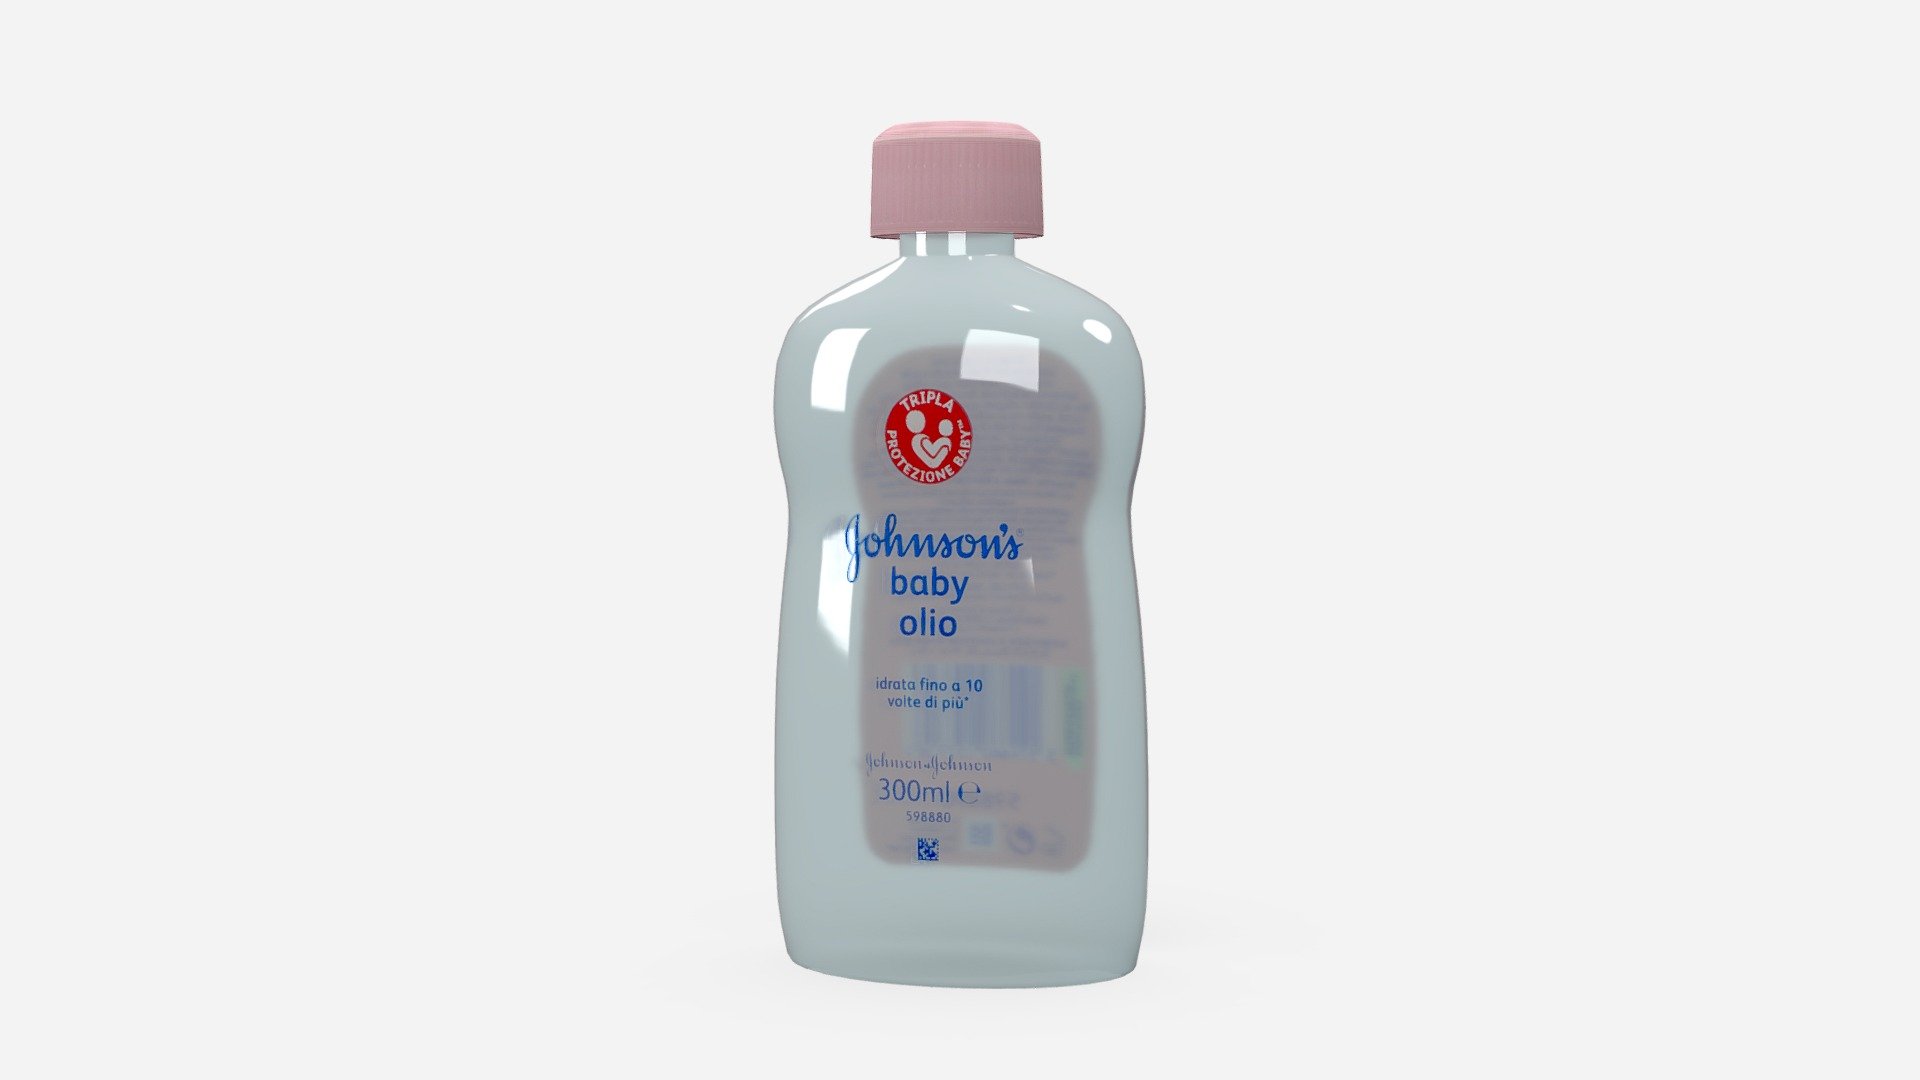 Johnson's Baby Olio Baby Per Il Corpo 300 ml
VR and game ready for high quality Architectural Visualization
EAN: 3574660057706 - JOHNSON'S - Baby Oil - 3D model by Invrsion 3d model